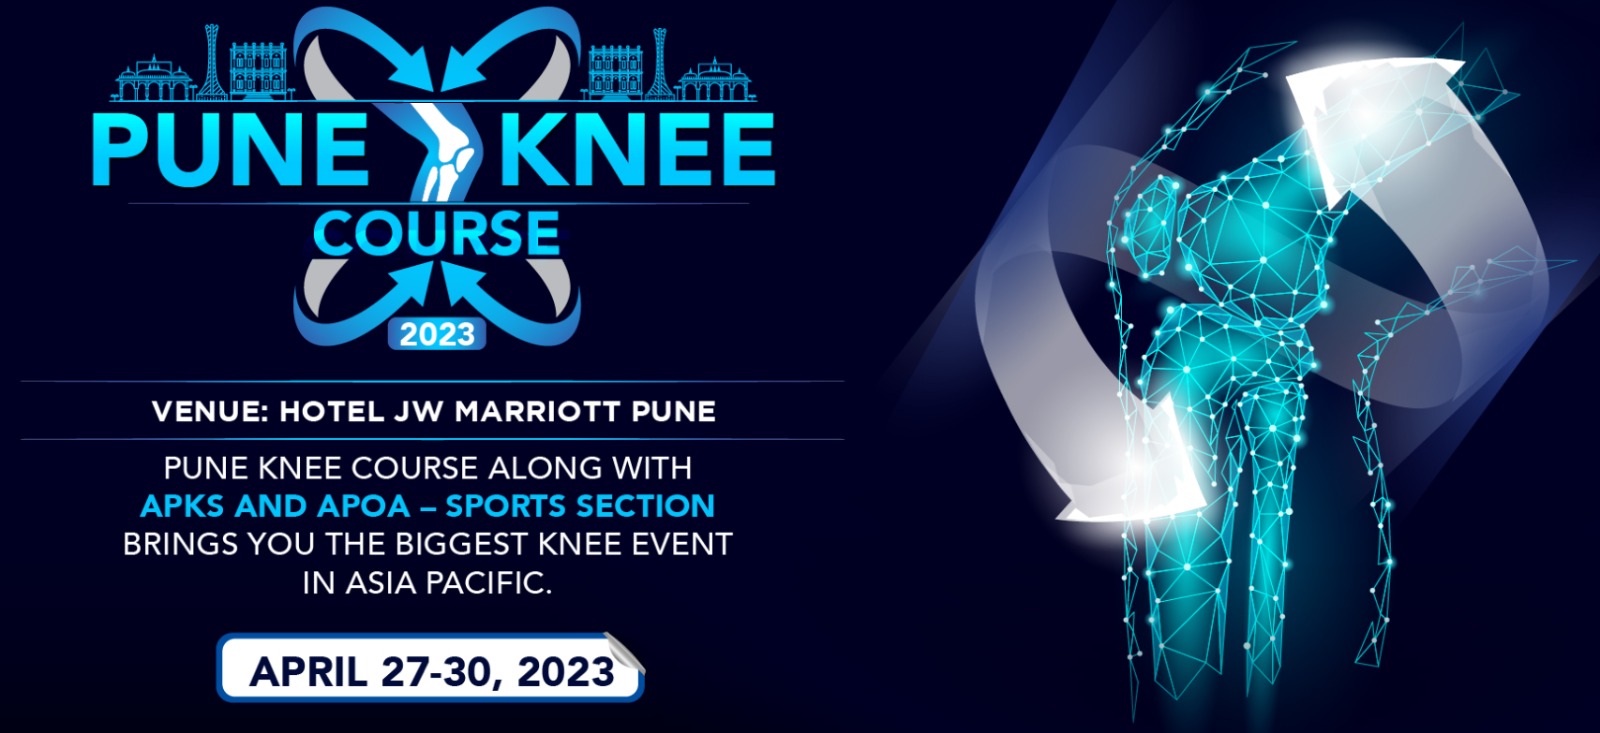 Pune Knee Course 2023